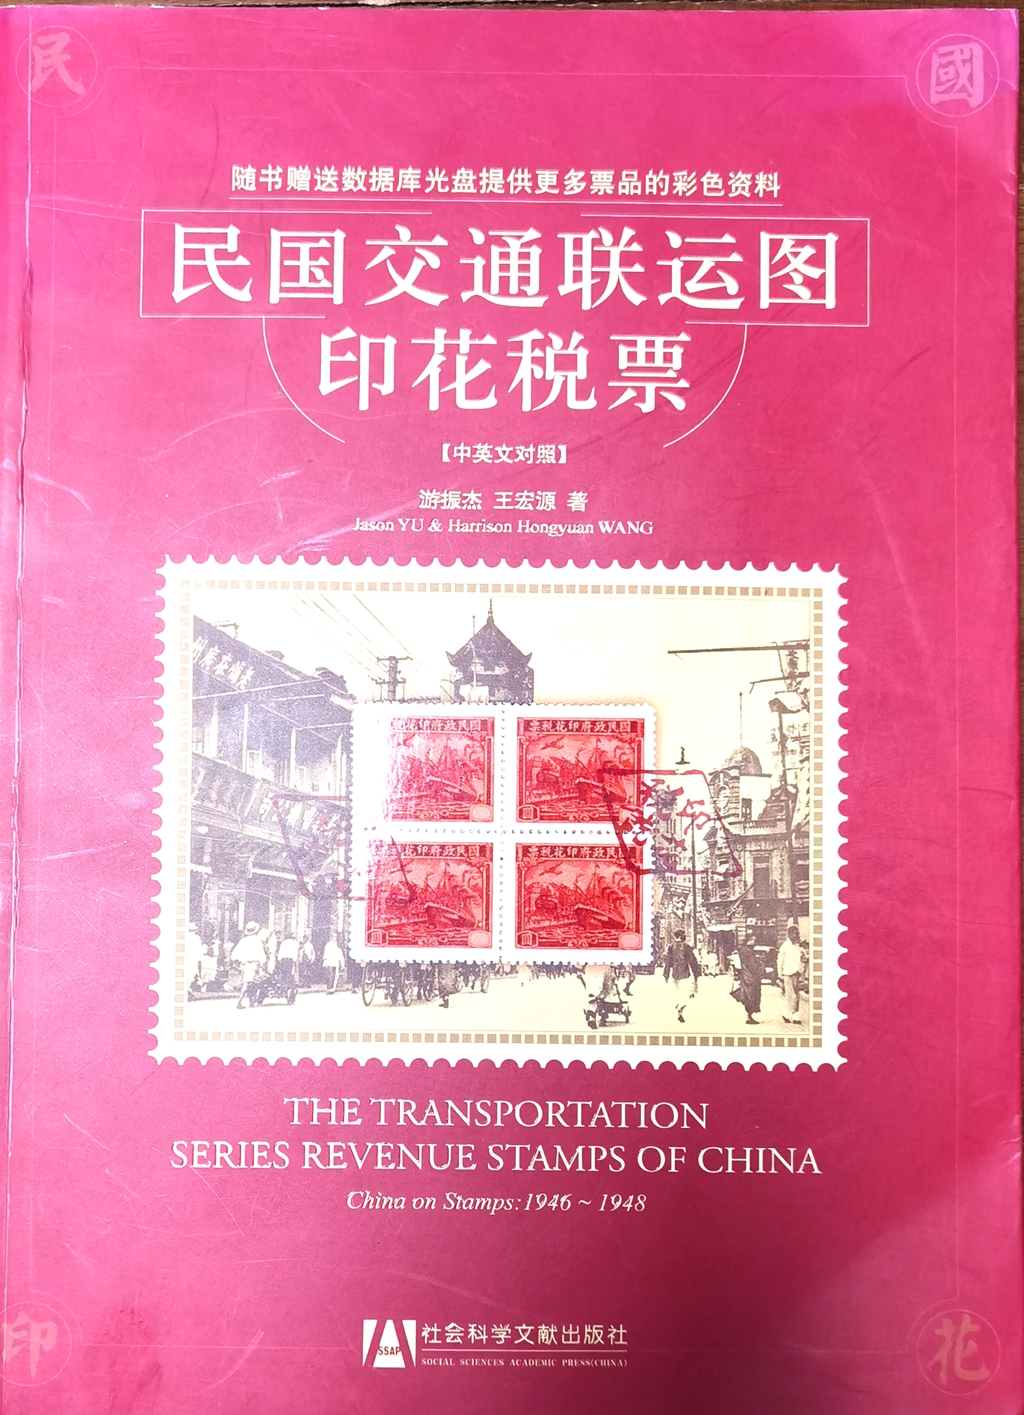 F2404 The Transportation Series Revenue Stamps of China (China on Stamps:1946-1948)